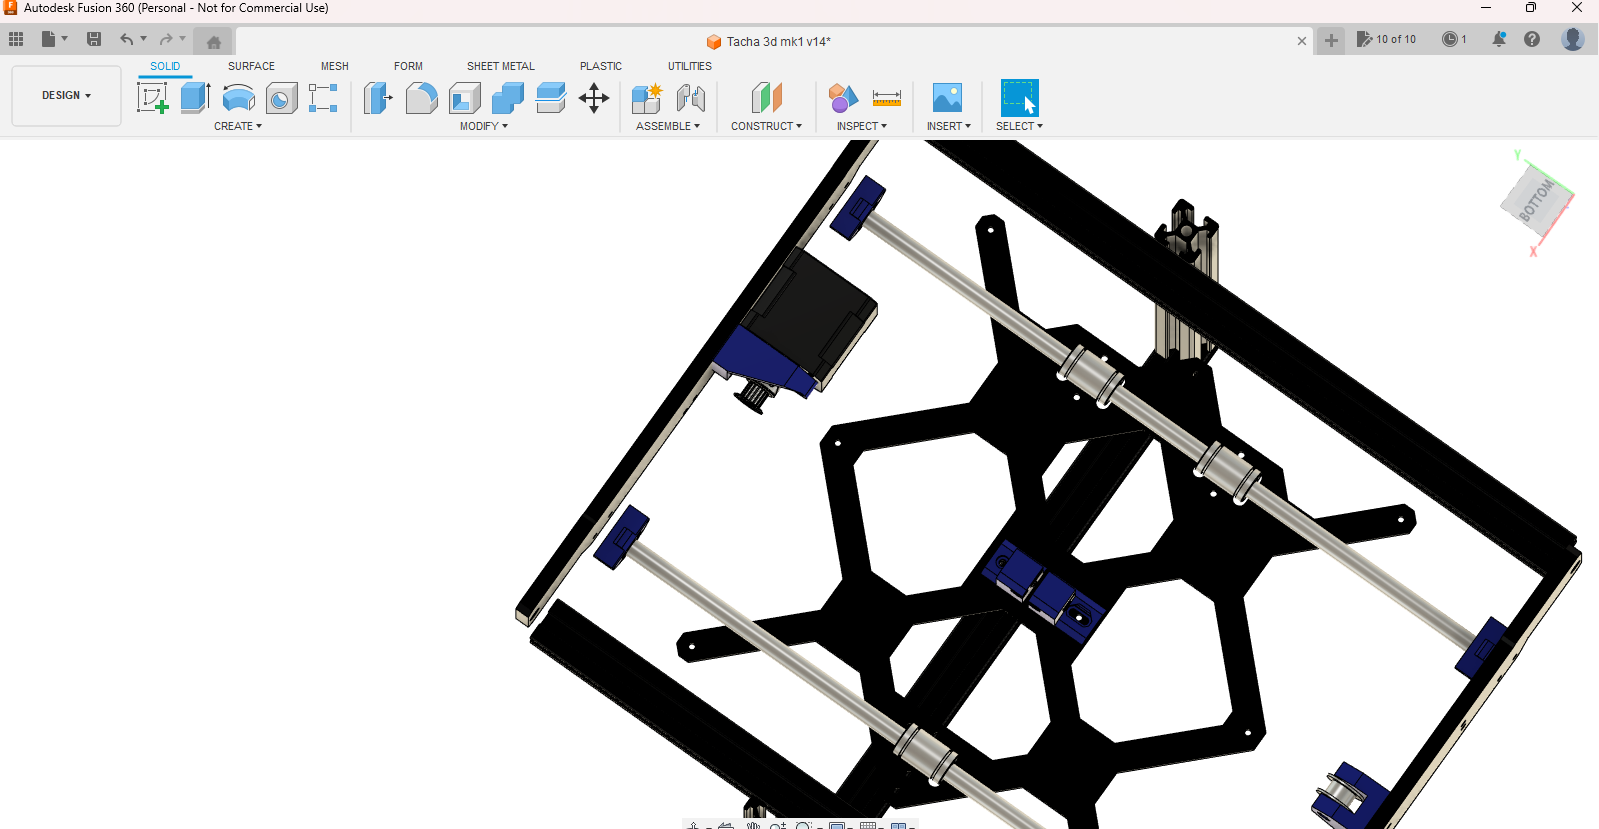 Autodesk Fusion 360 (Personal - Not for Commercial Use) 6_30_2023 9_28_41 PM.png